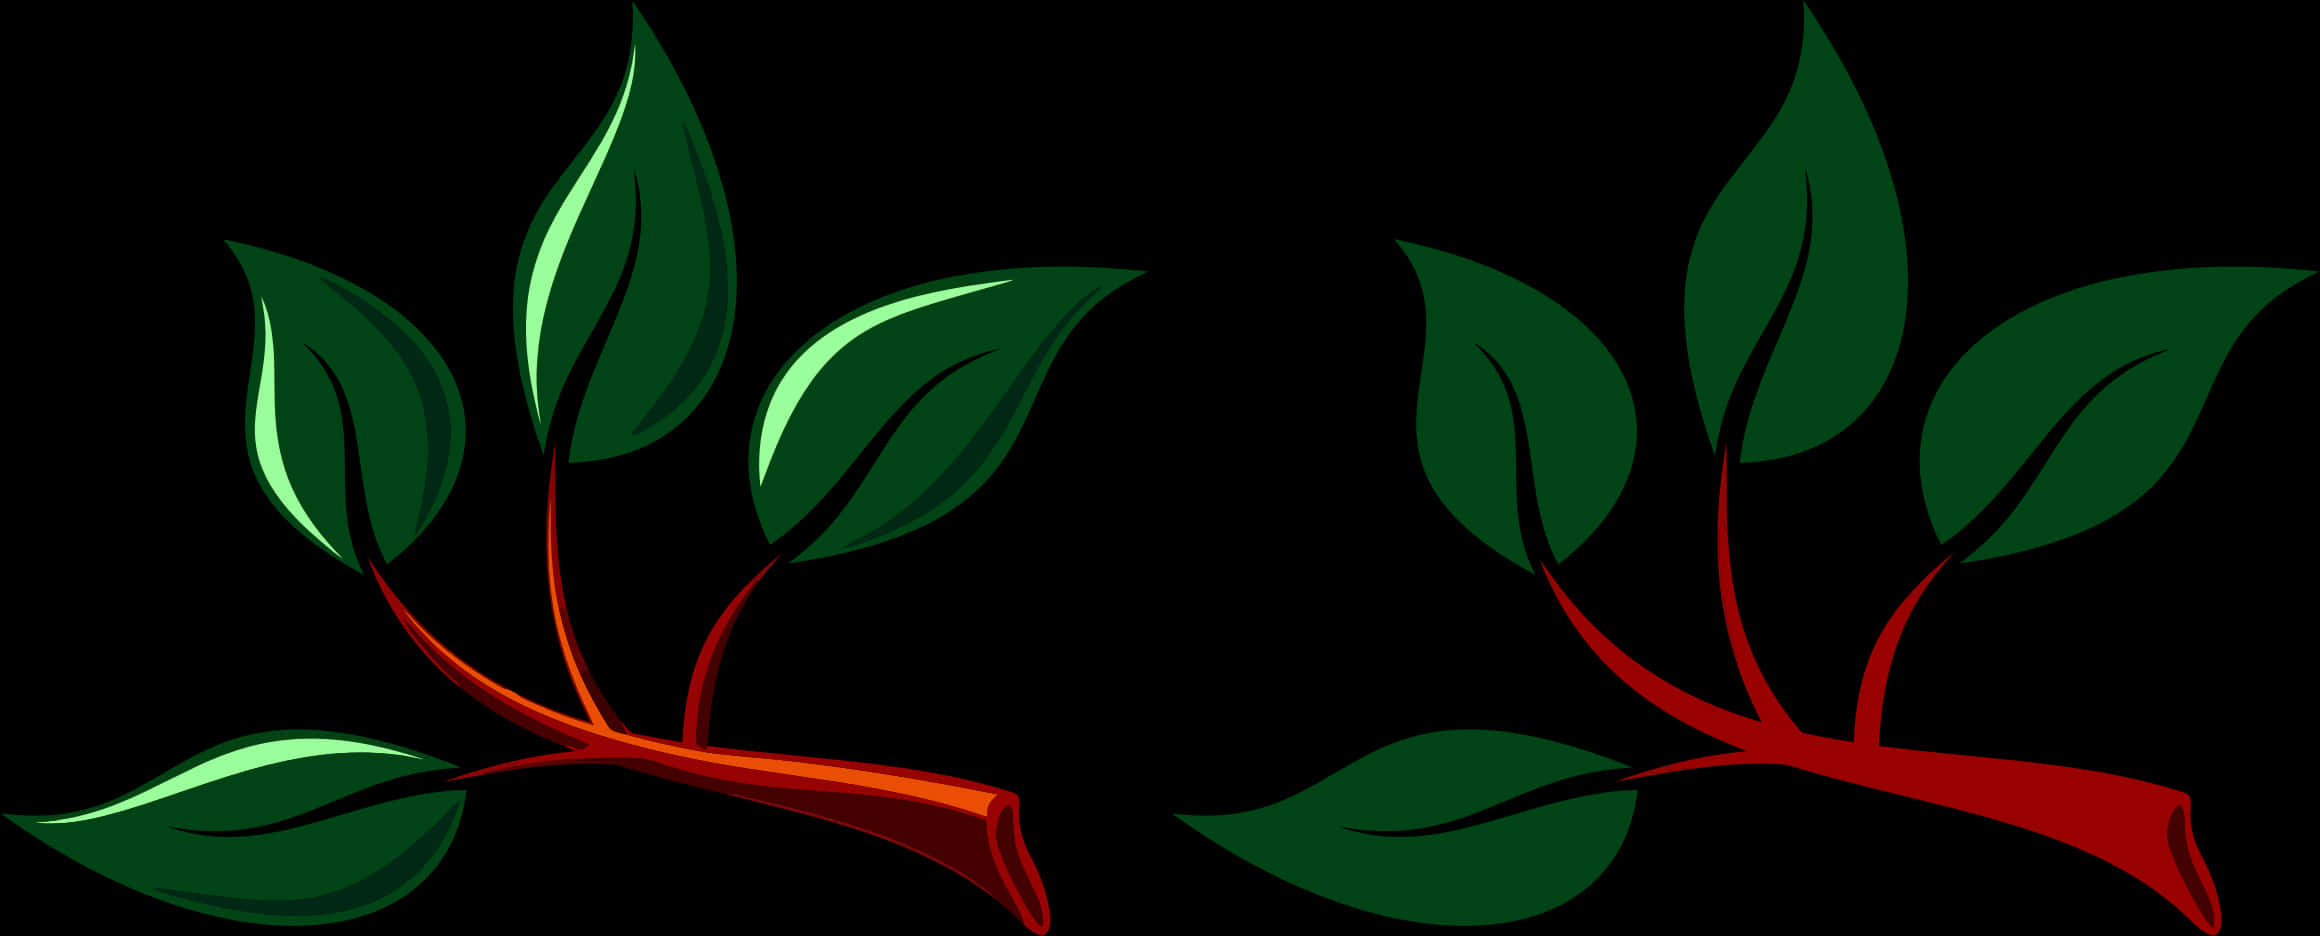 A Green And Red Leaves